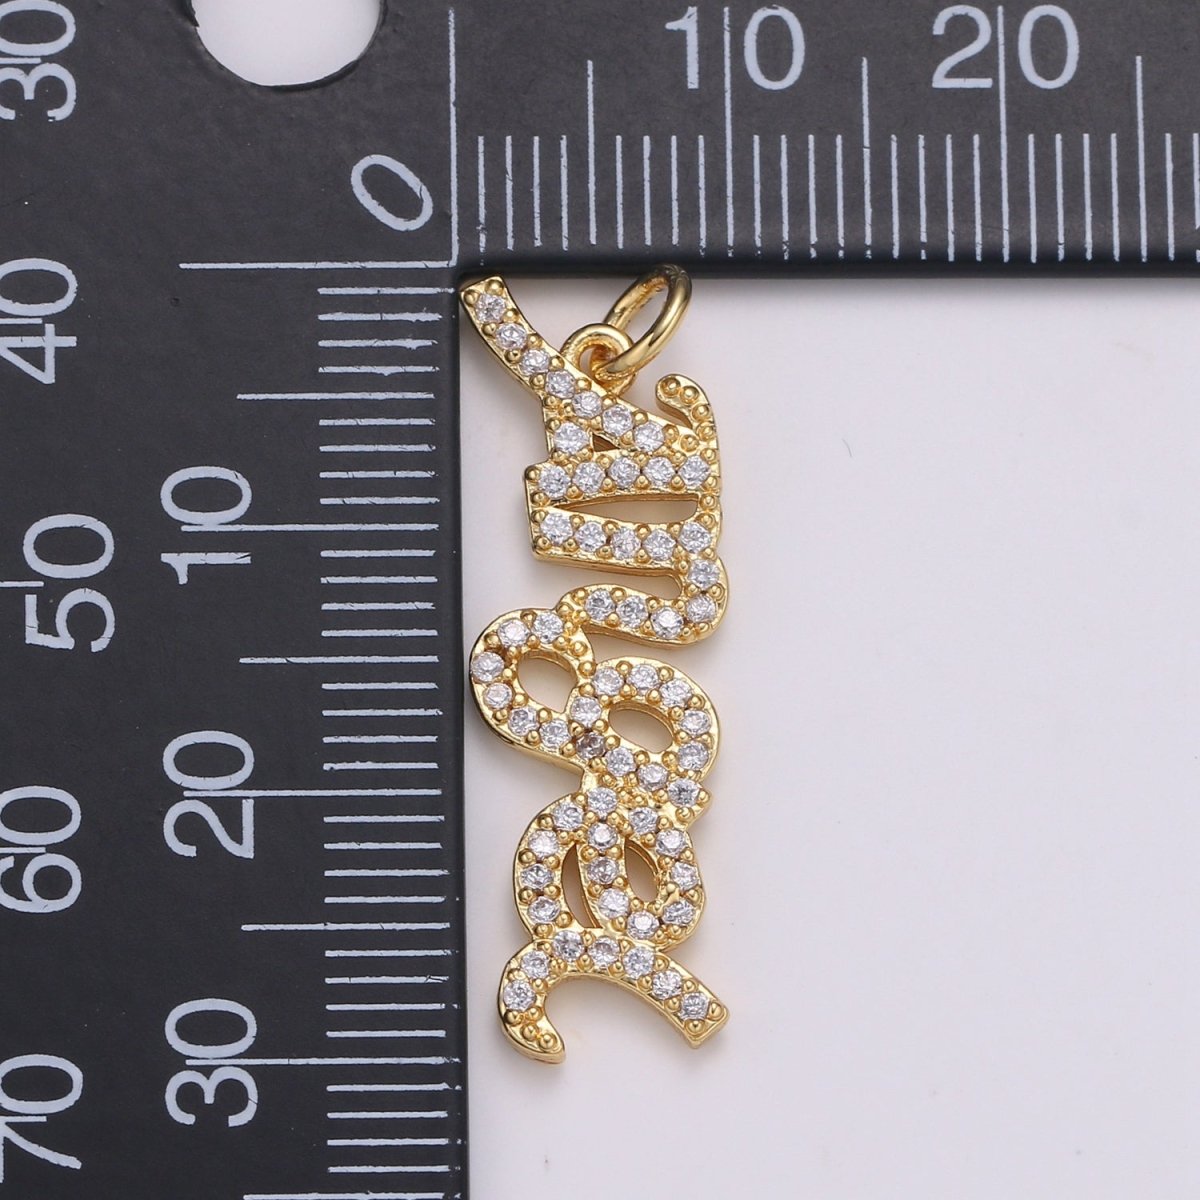 Micro Pave 14k Gold Filled Angel Script Words Charm for Dainty Angel Bracelet Necklace Earring Pendant Component Diy Jewelry Making SupplyC-403 - DLUXCA